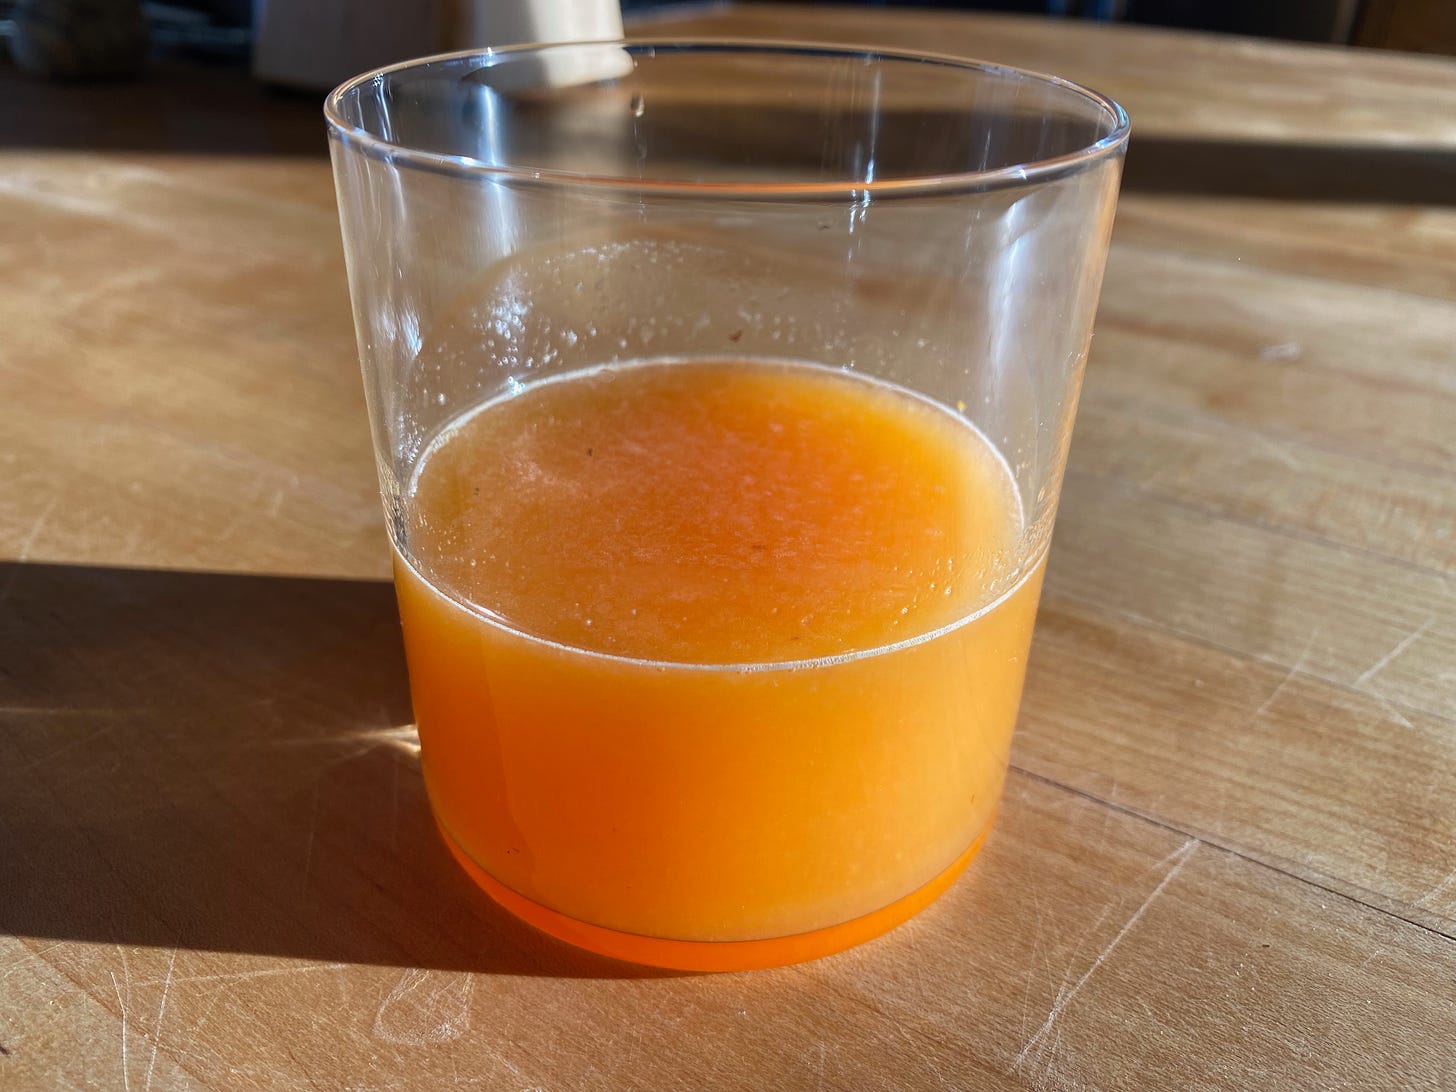 A class of freshly-squeezed orange juice sits on a sunny wooden countertop.